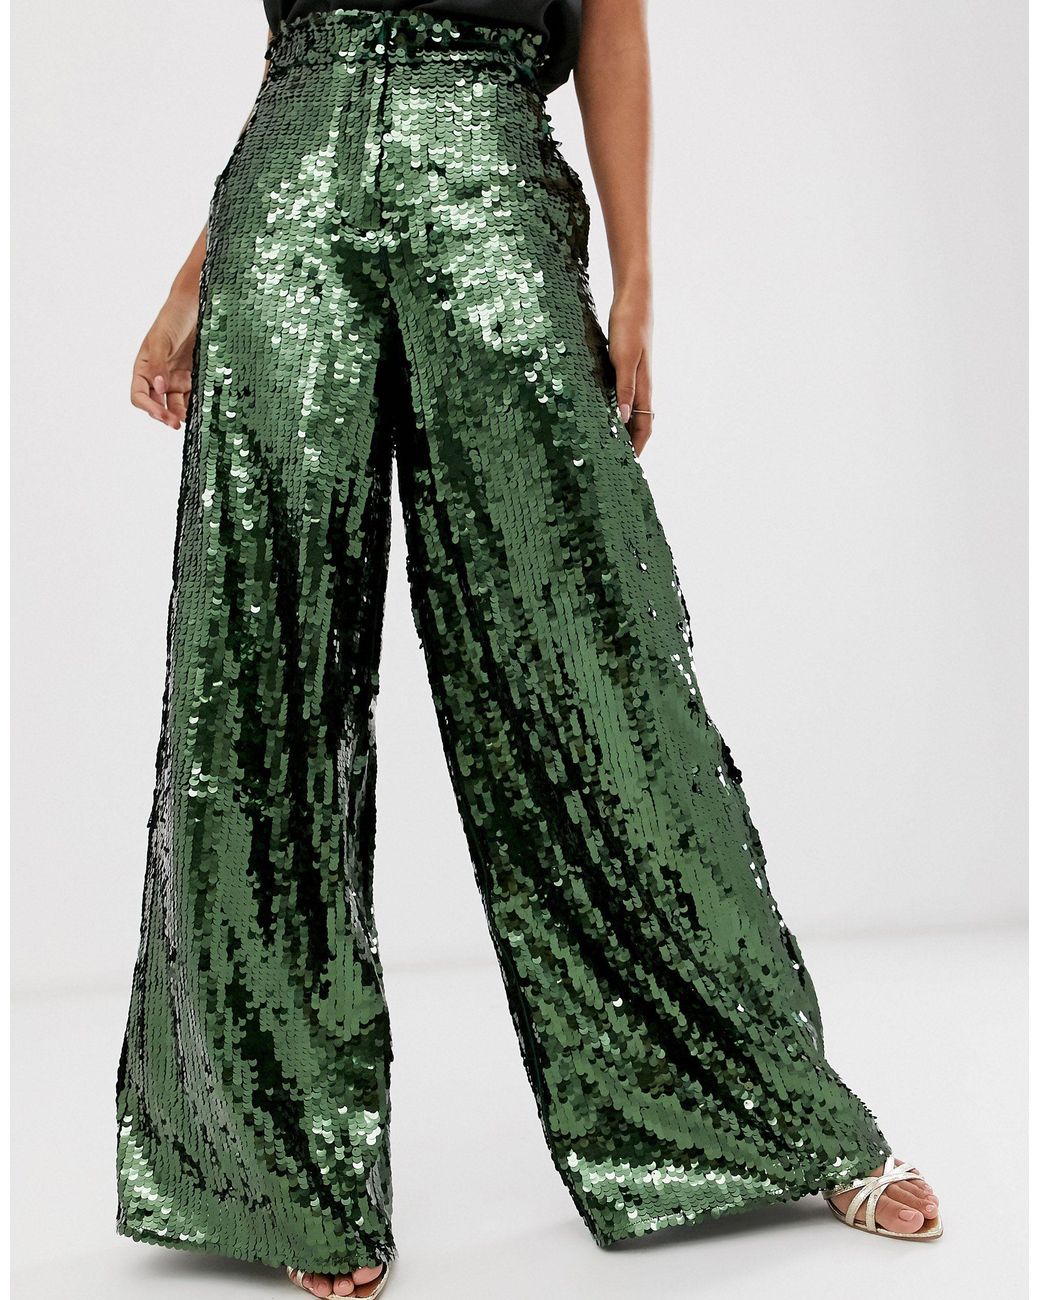 PARTY ON Green Sequin Womens Pants  Birthday dress women Pants for women Green  sequins